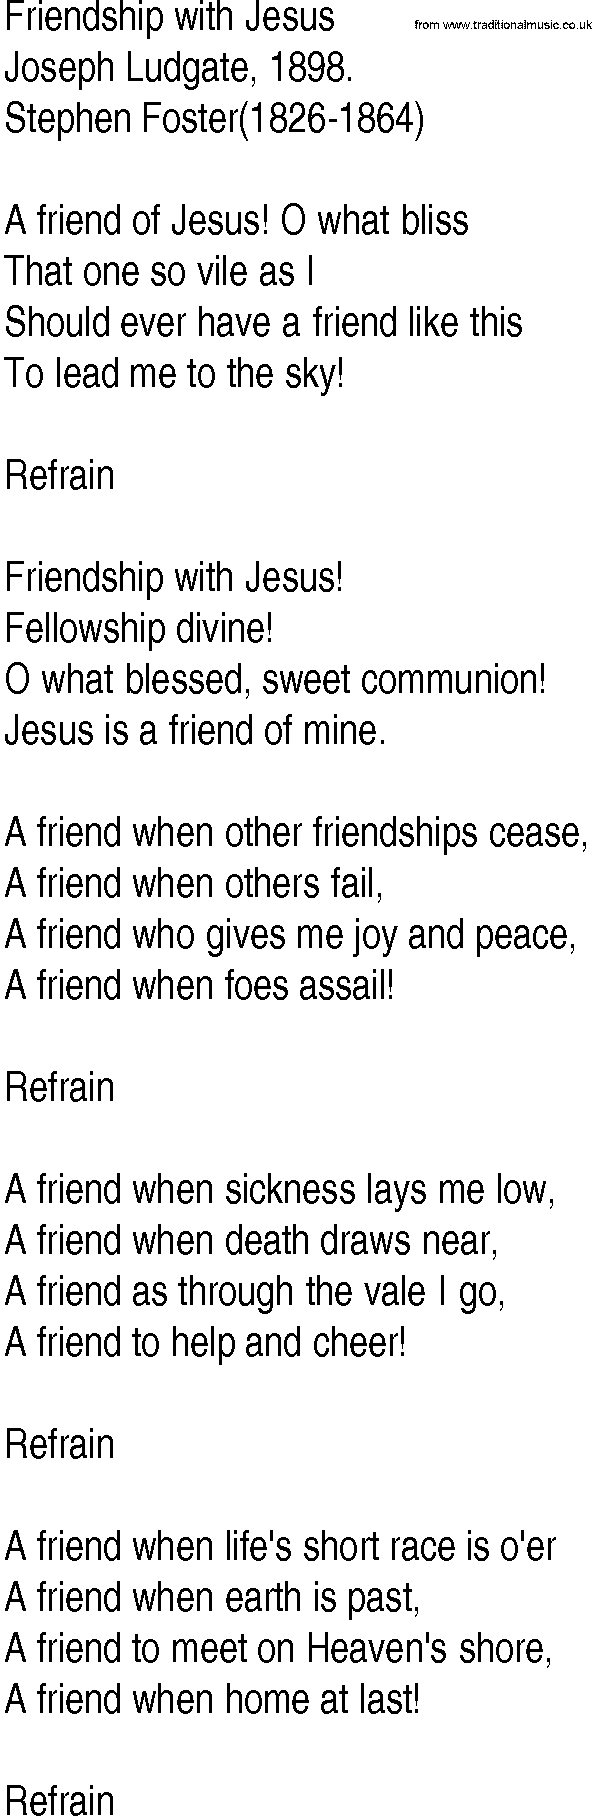 Hymn and Gospel Song: Friendship with Jesus by Joseph Ludgate lyrics